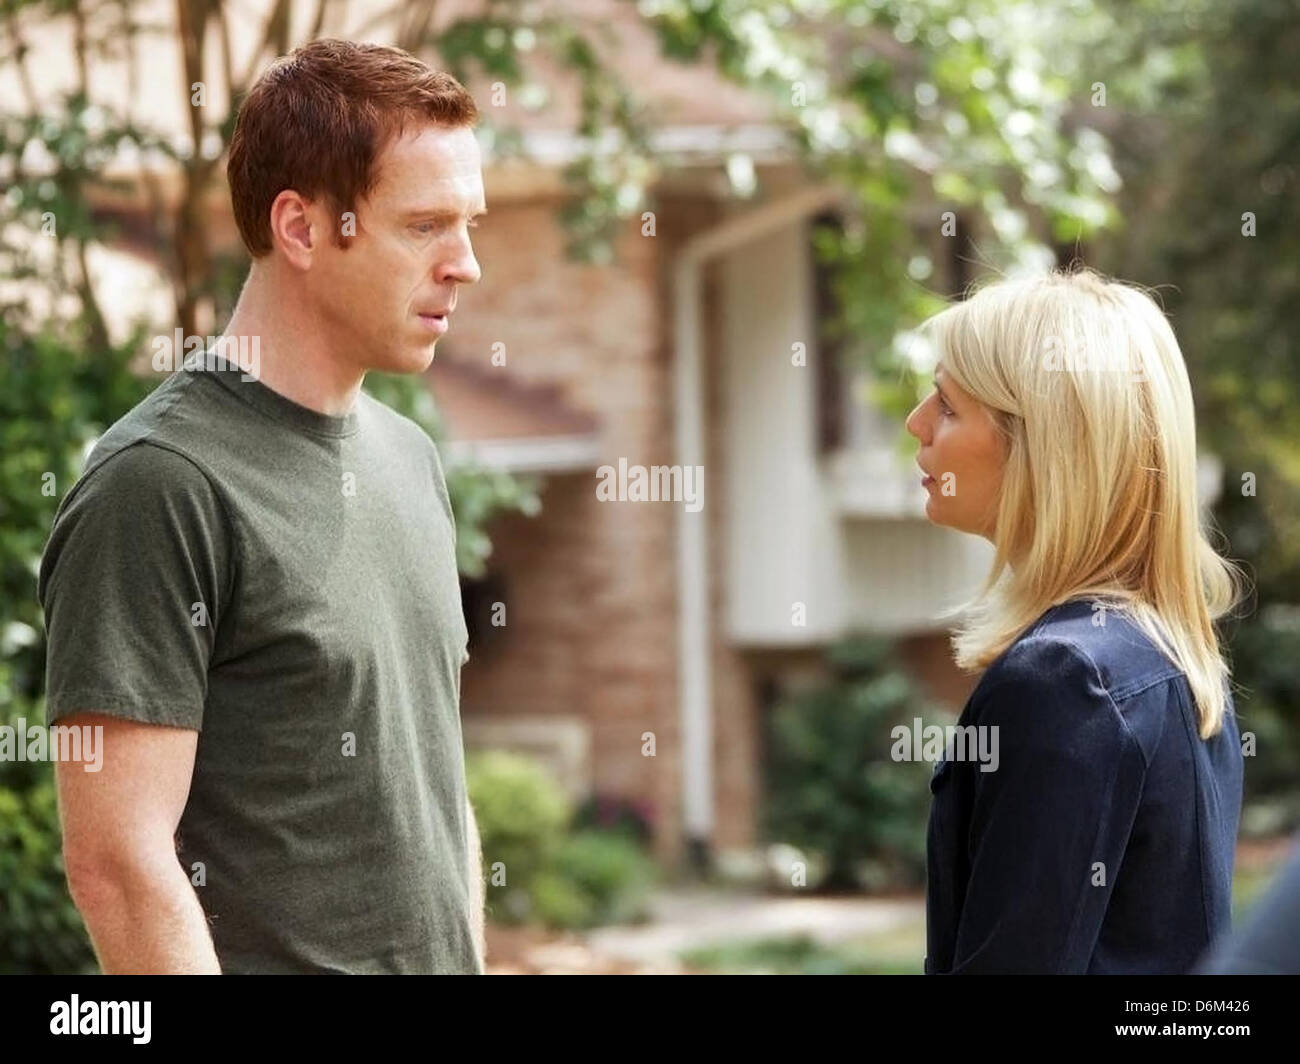 Damian Lewis and Claire Danes Film still from the television series ' Homeland' (2012) This is a PR photo. WENN does not claim Stock Photo